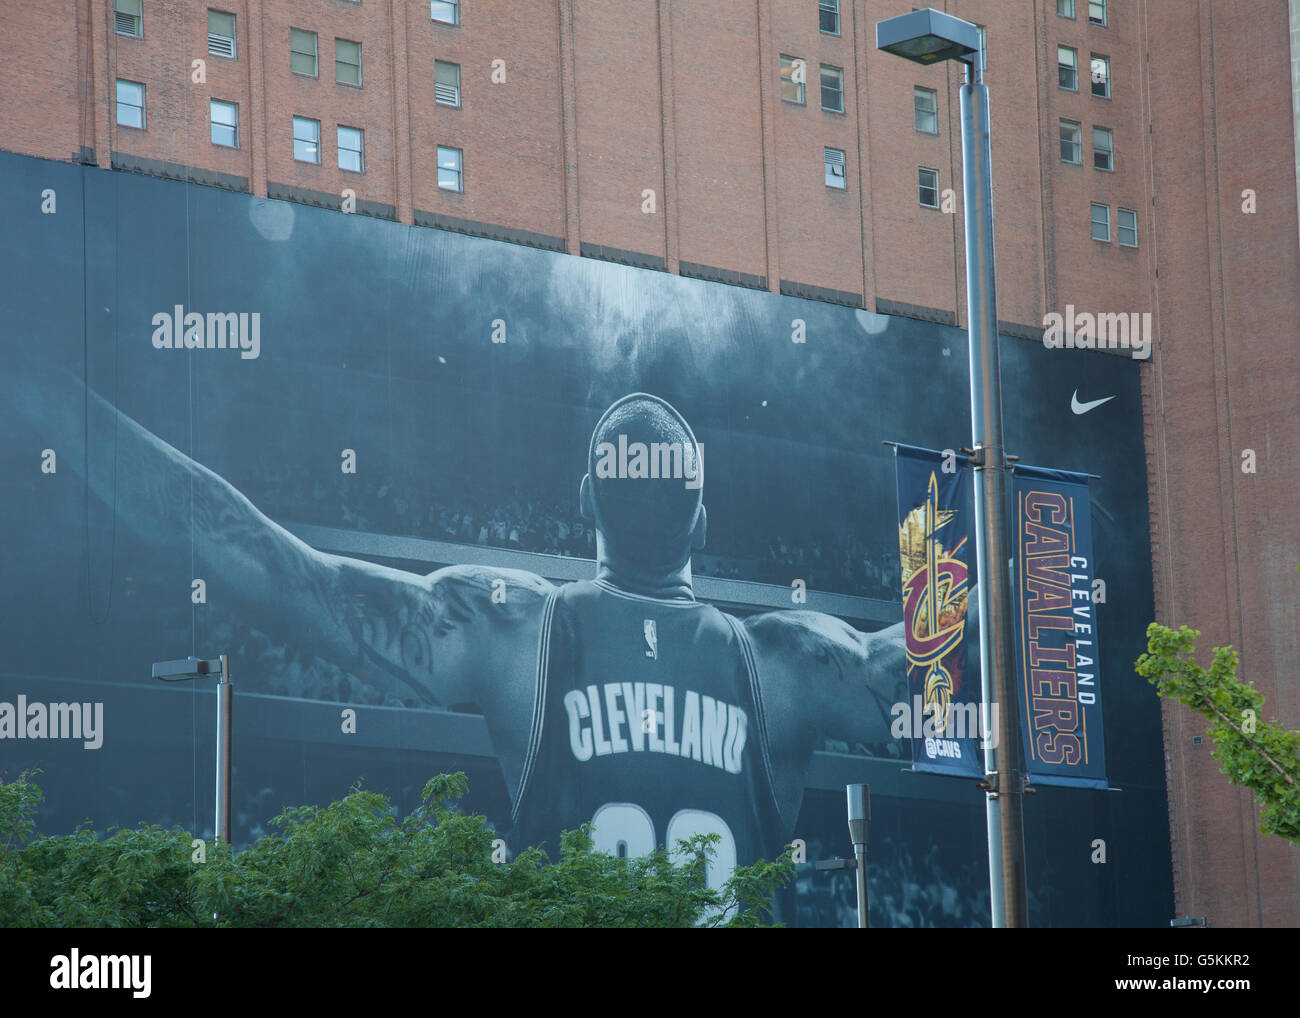 Mural of LeBron James on the wall of a building in Cleveland, Ohio Stock Photo